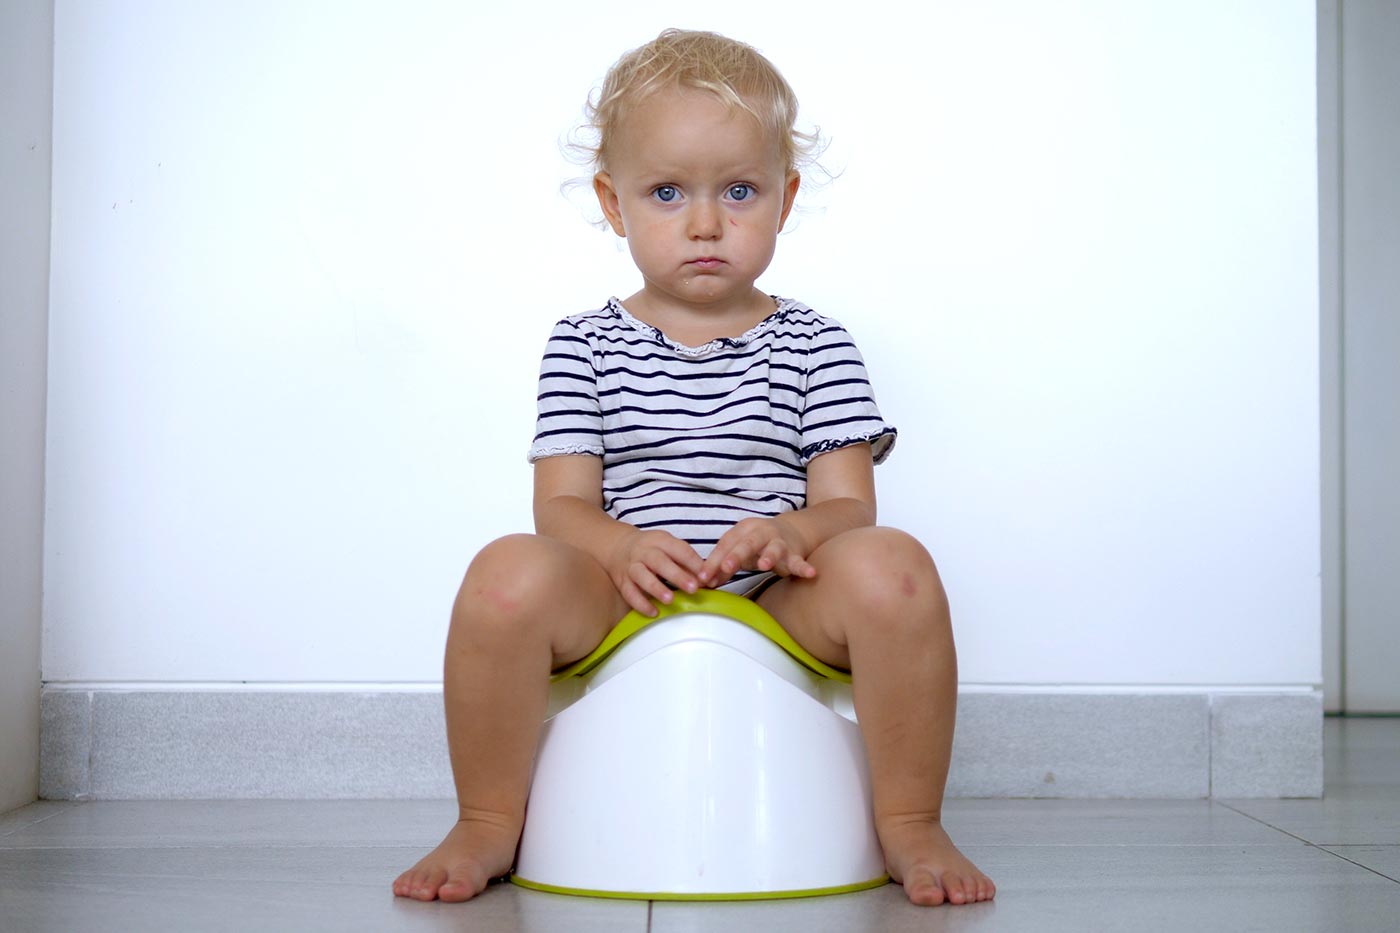 3 ½ Year Old Is Not Potty Trained